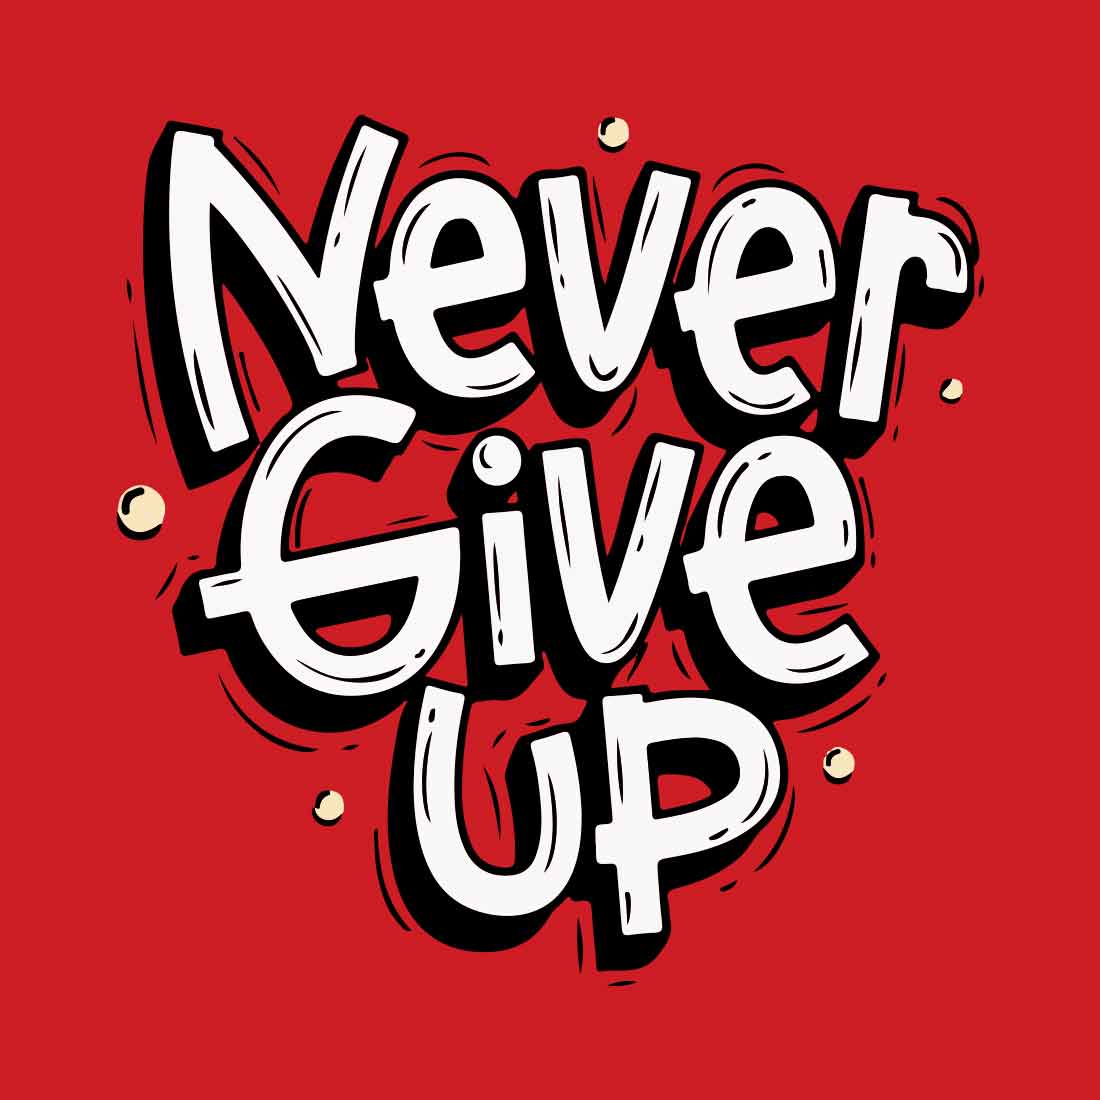 Never Give Up Red Men T-Shirt